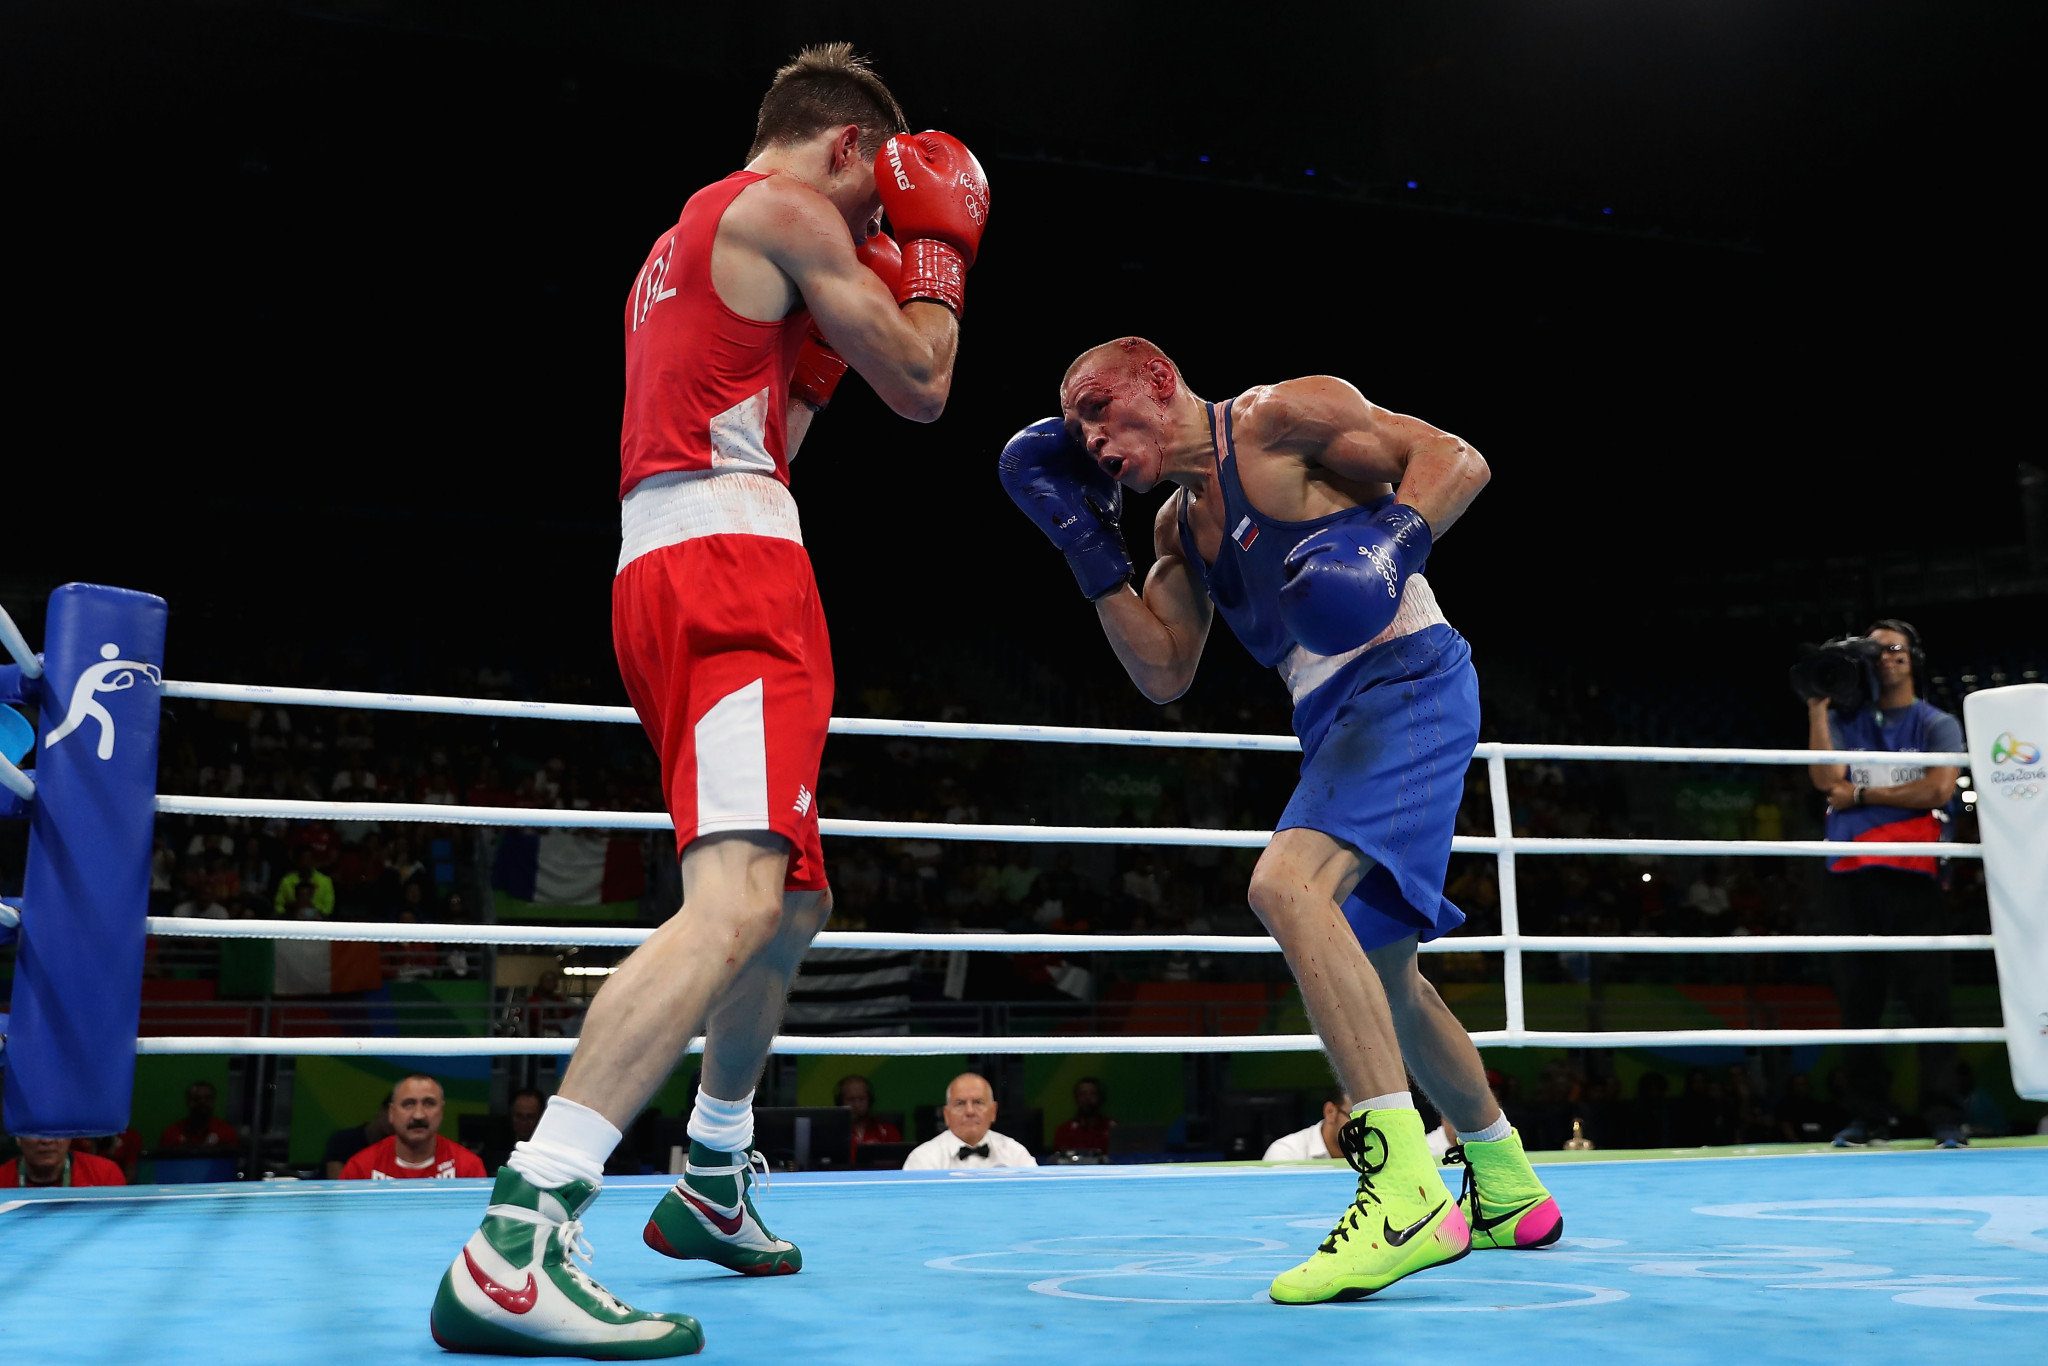 An investigation is still ongoing into Olympic boxing judging at Rio 2016 ©Getty Images